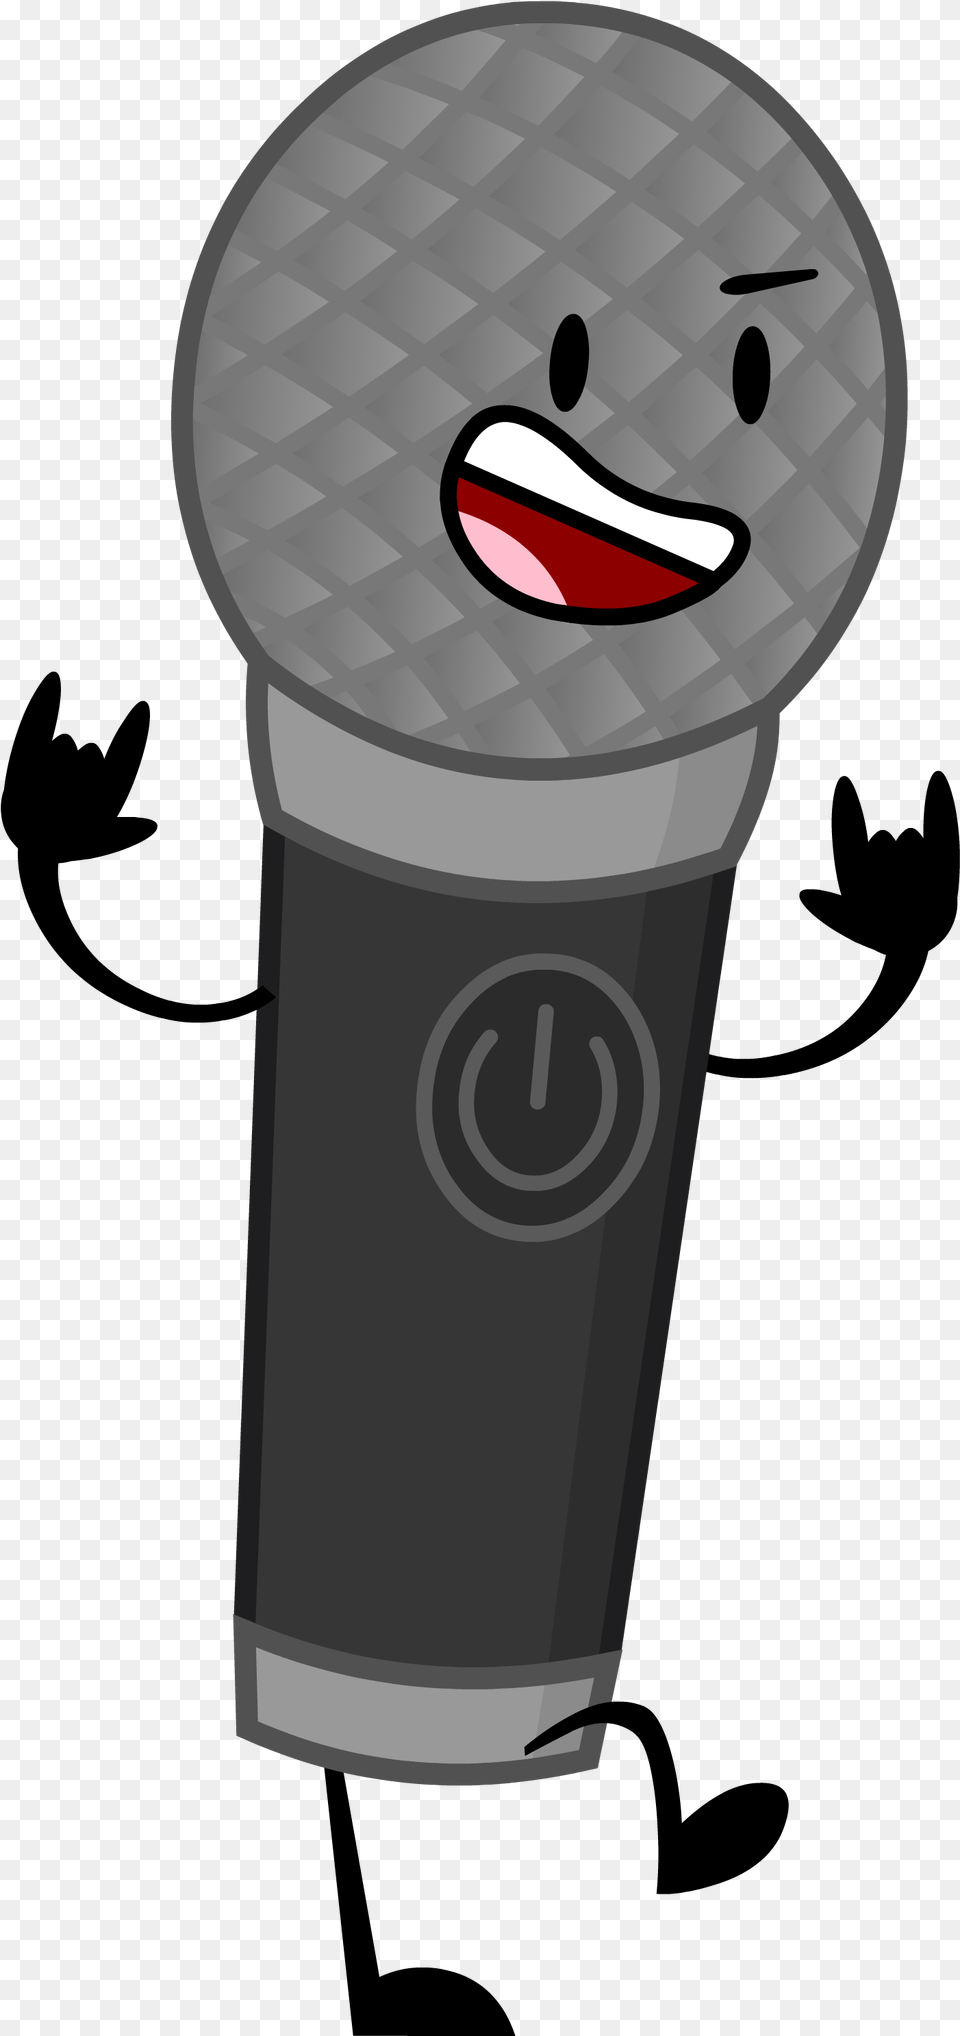 X 3018 1 Inanimate Insanity 2 Mic, Electrical Device, Microphone, Bottle, Shaker Free Transparent Png